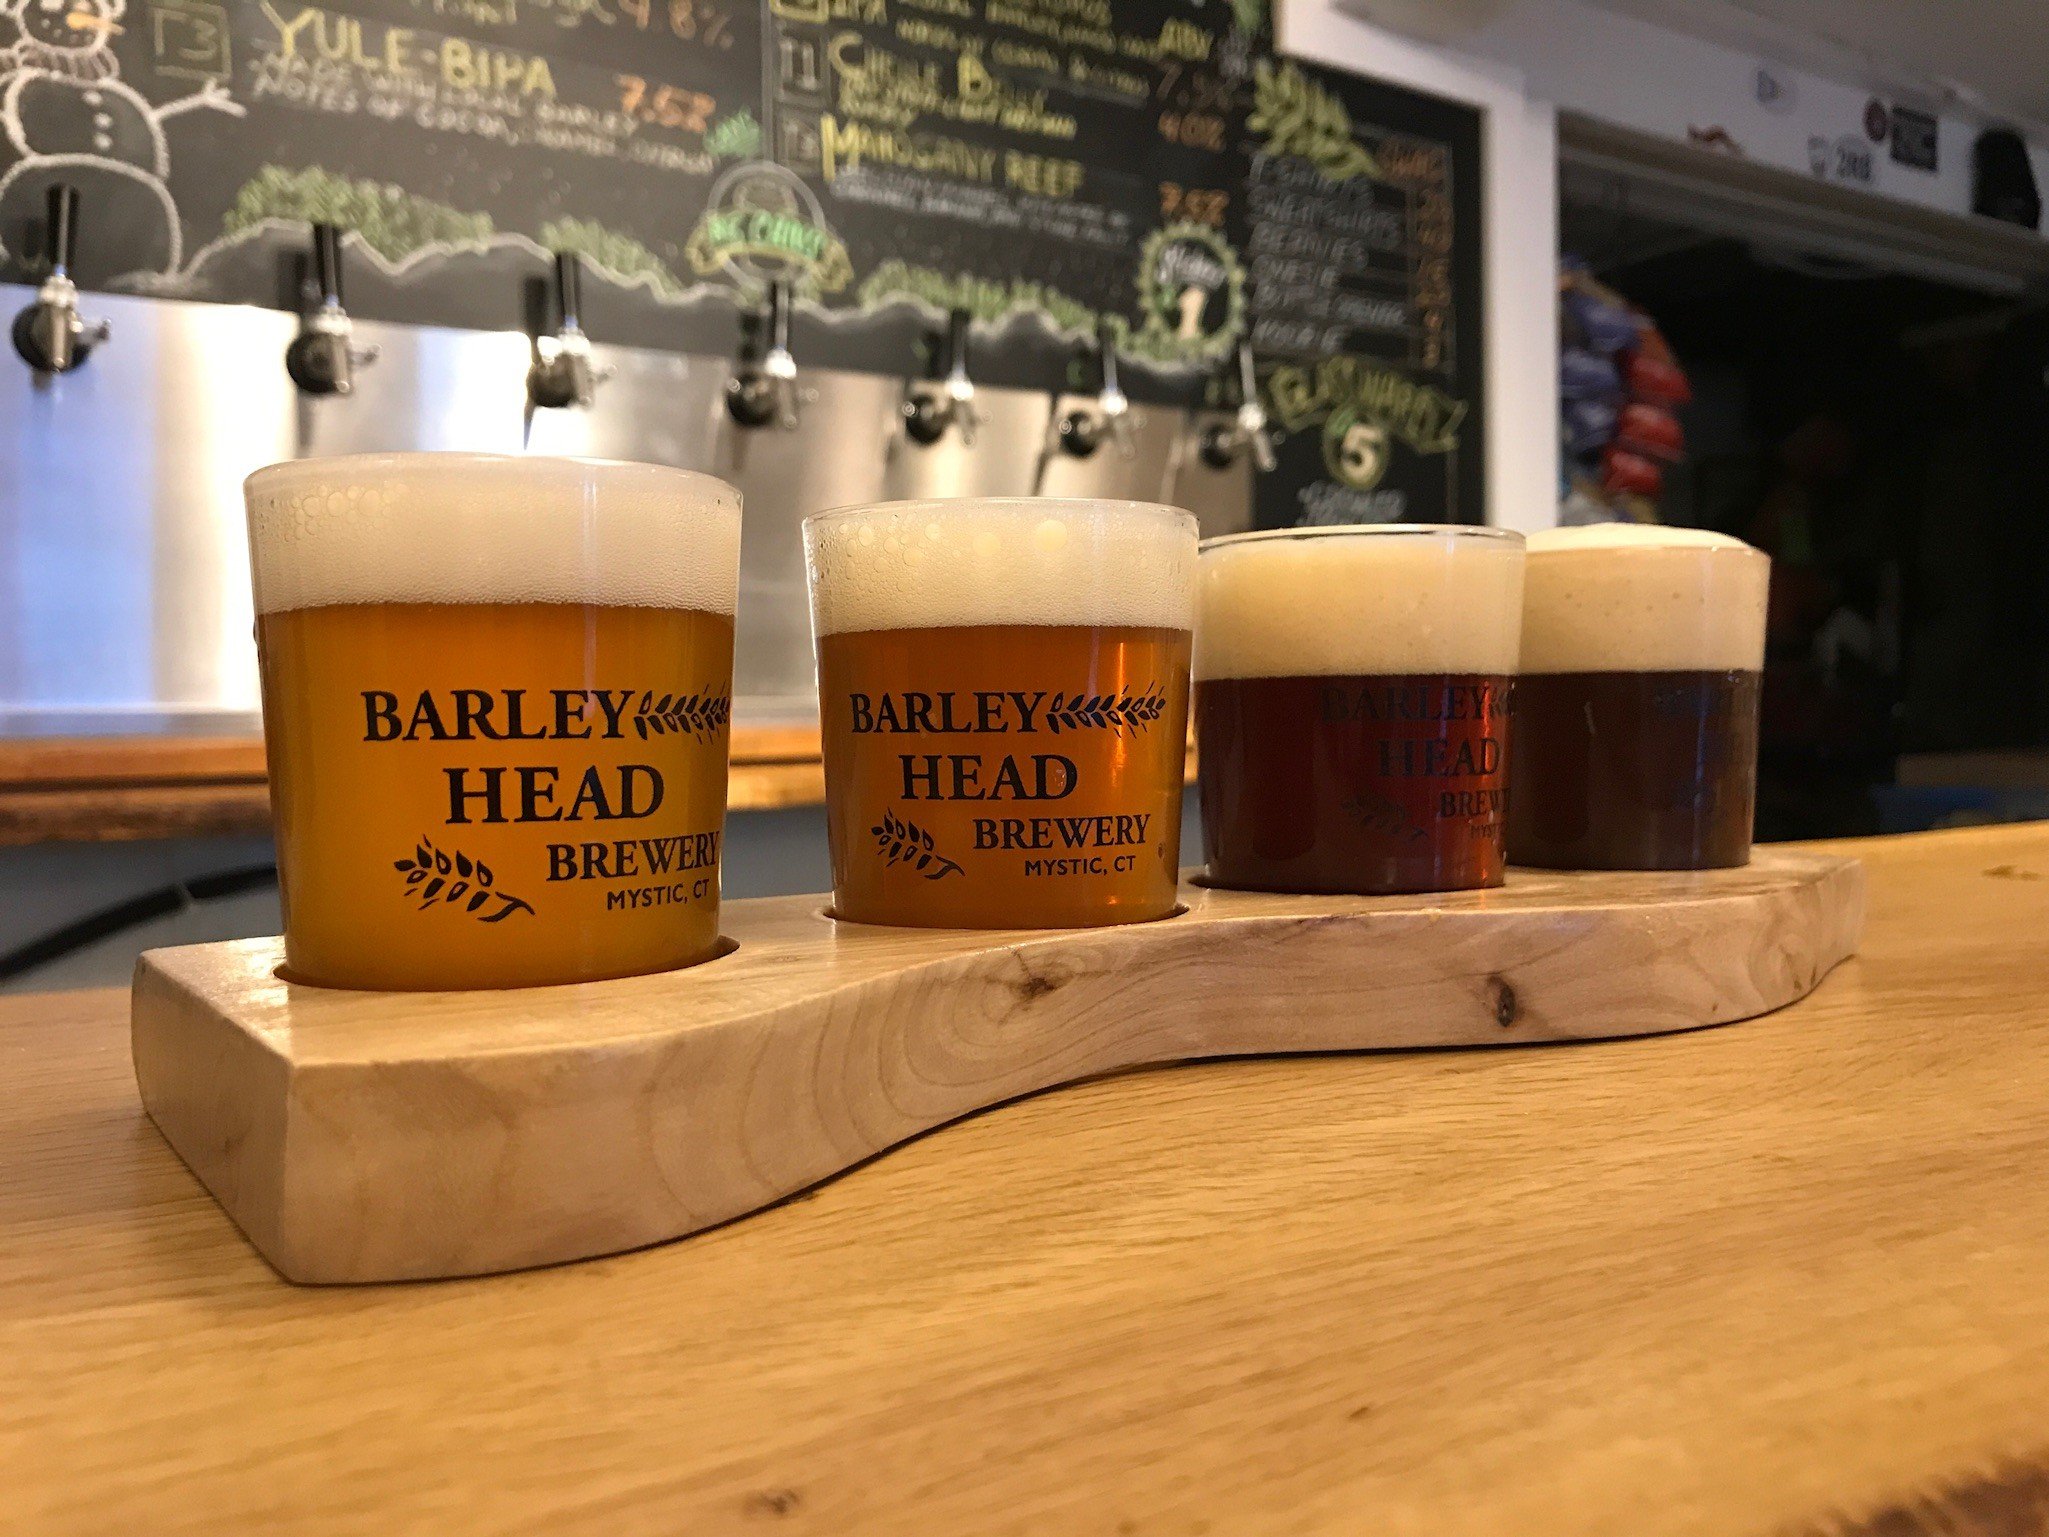 Barley Head Brewery brewery from United States